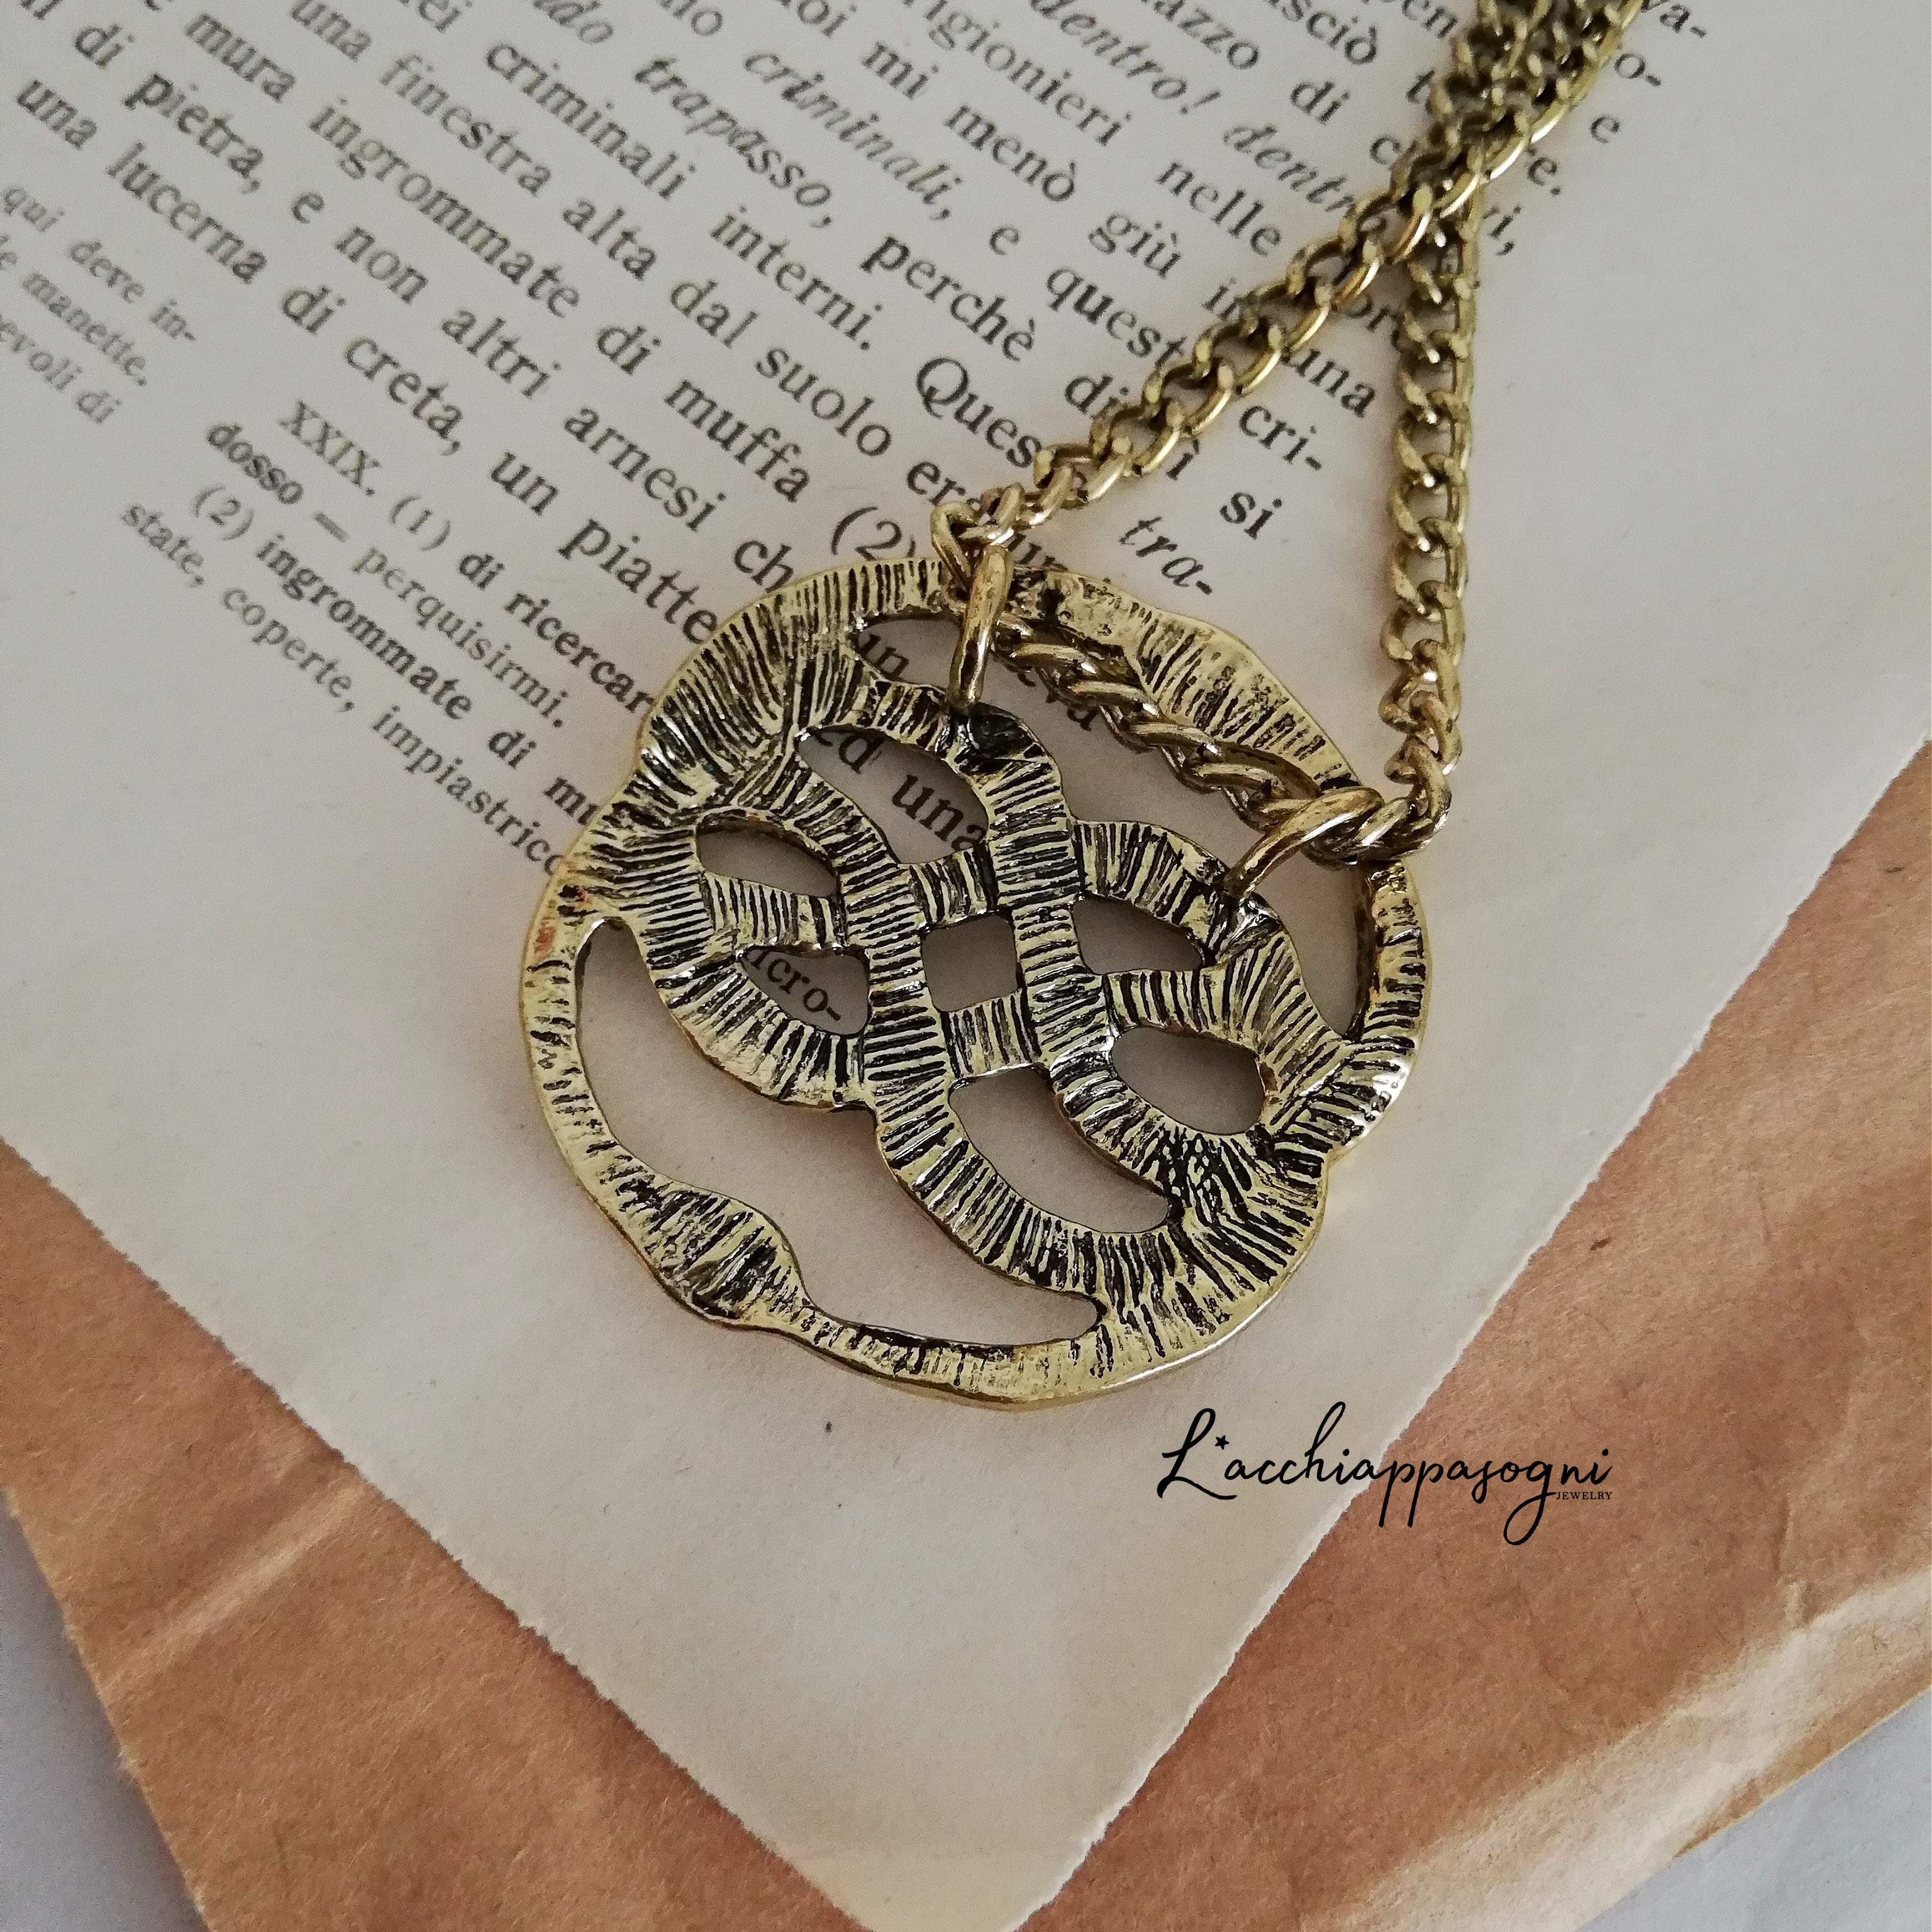 Mini Neverending Story Auryn Pendant And Gold Chain Necklace on Luulla